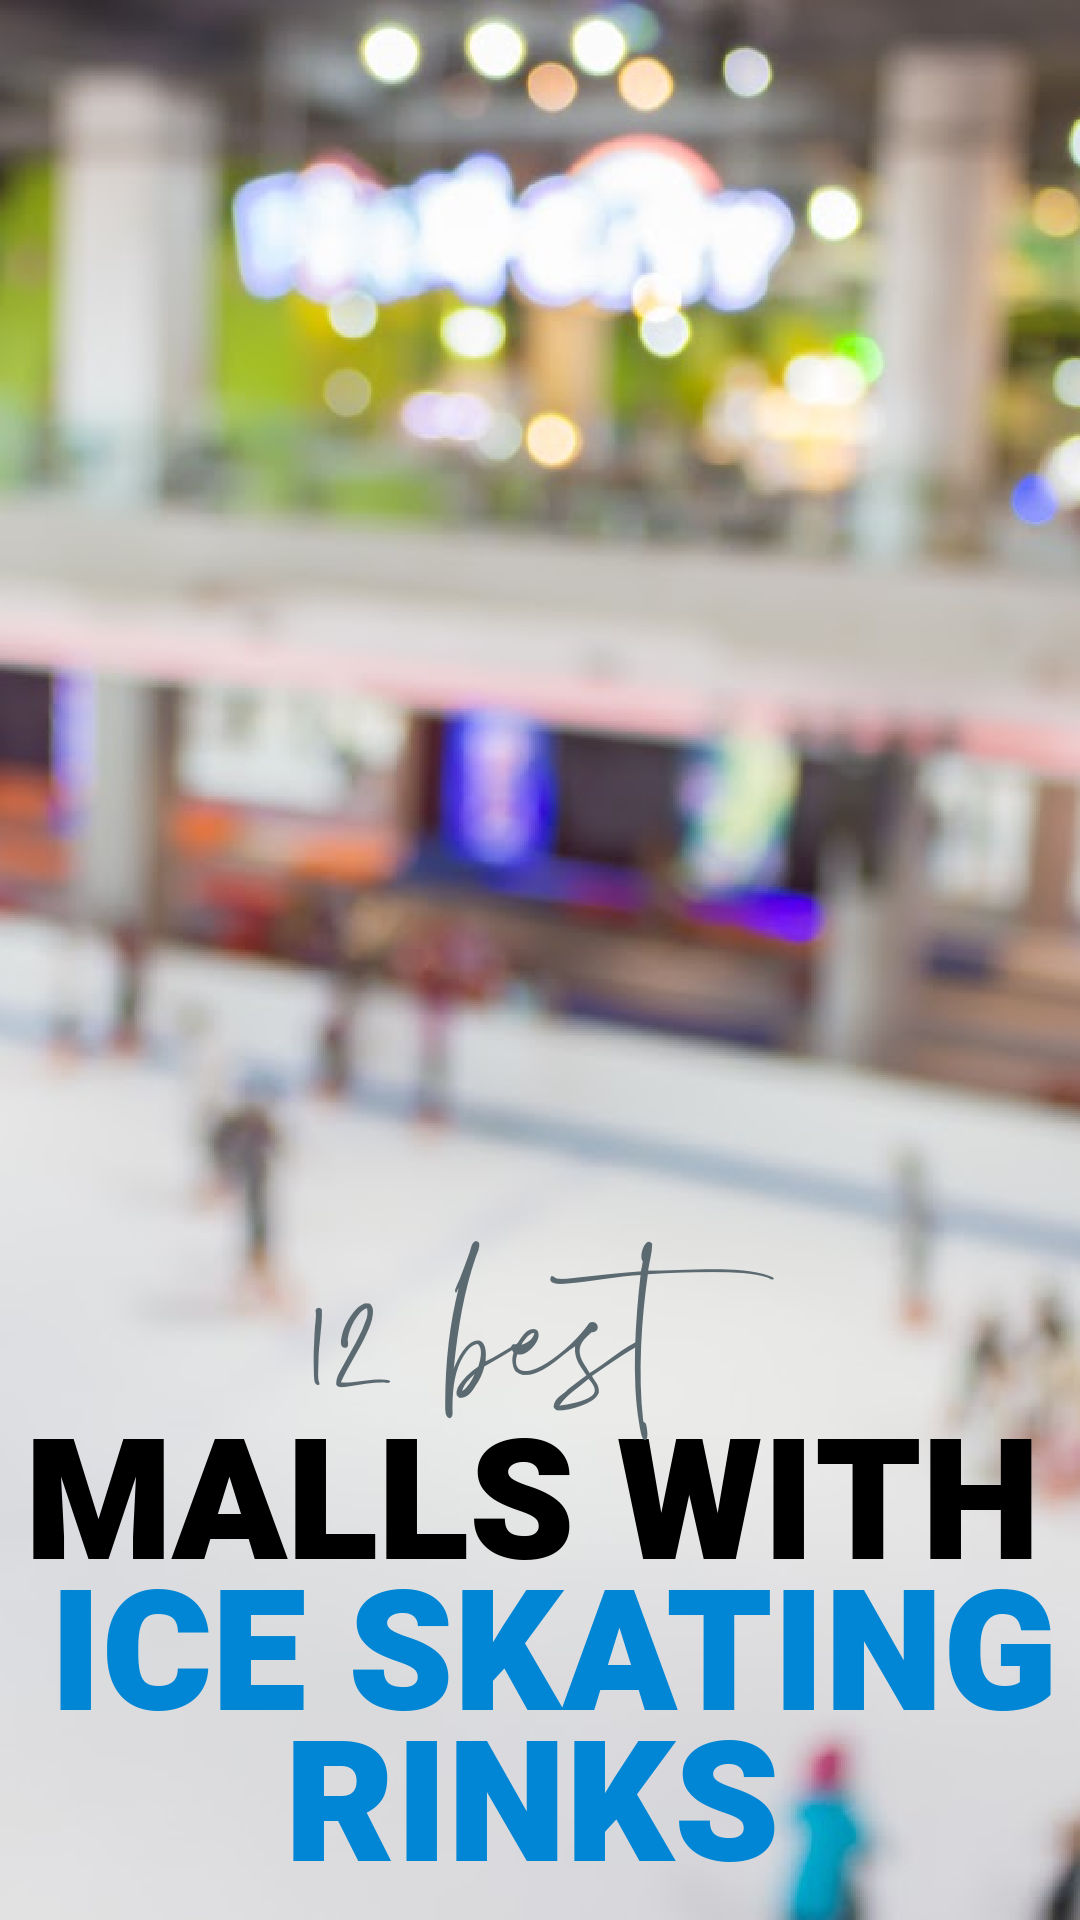 malls with ice skating rinks